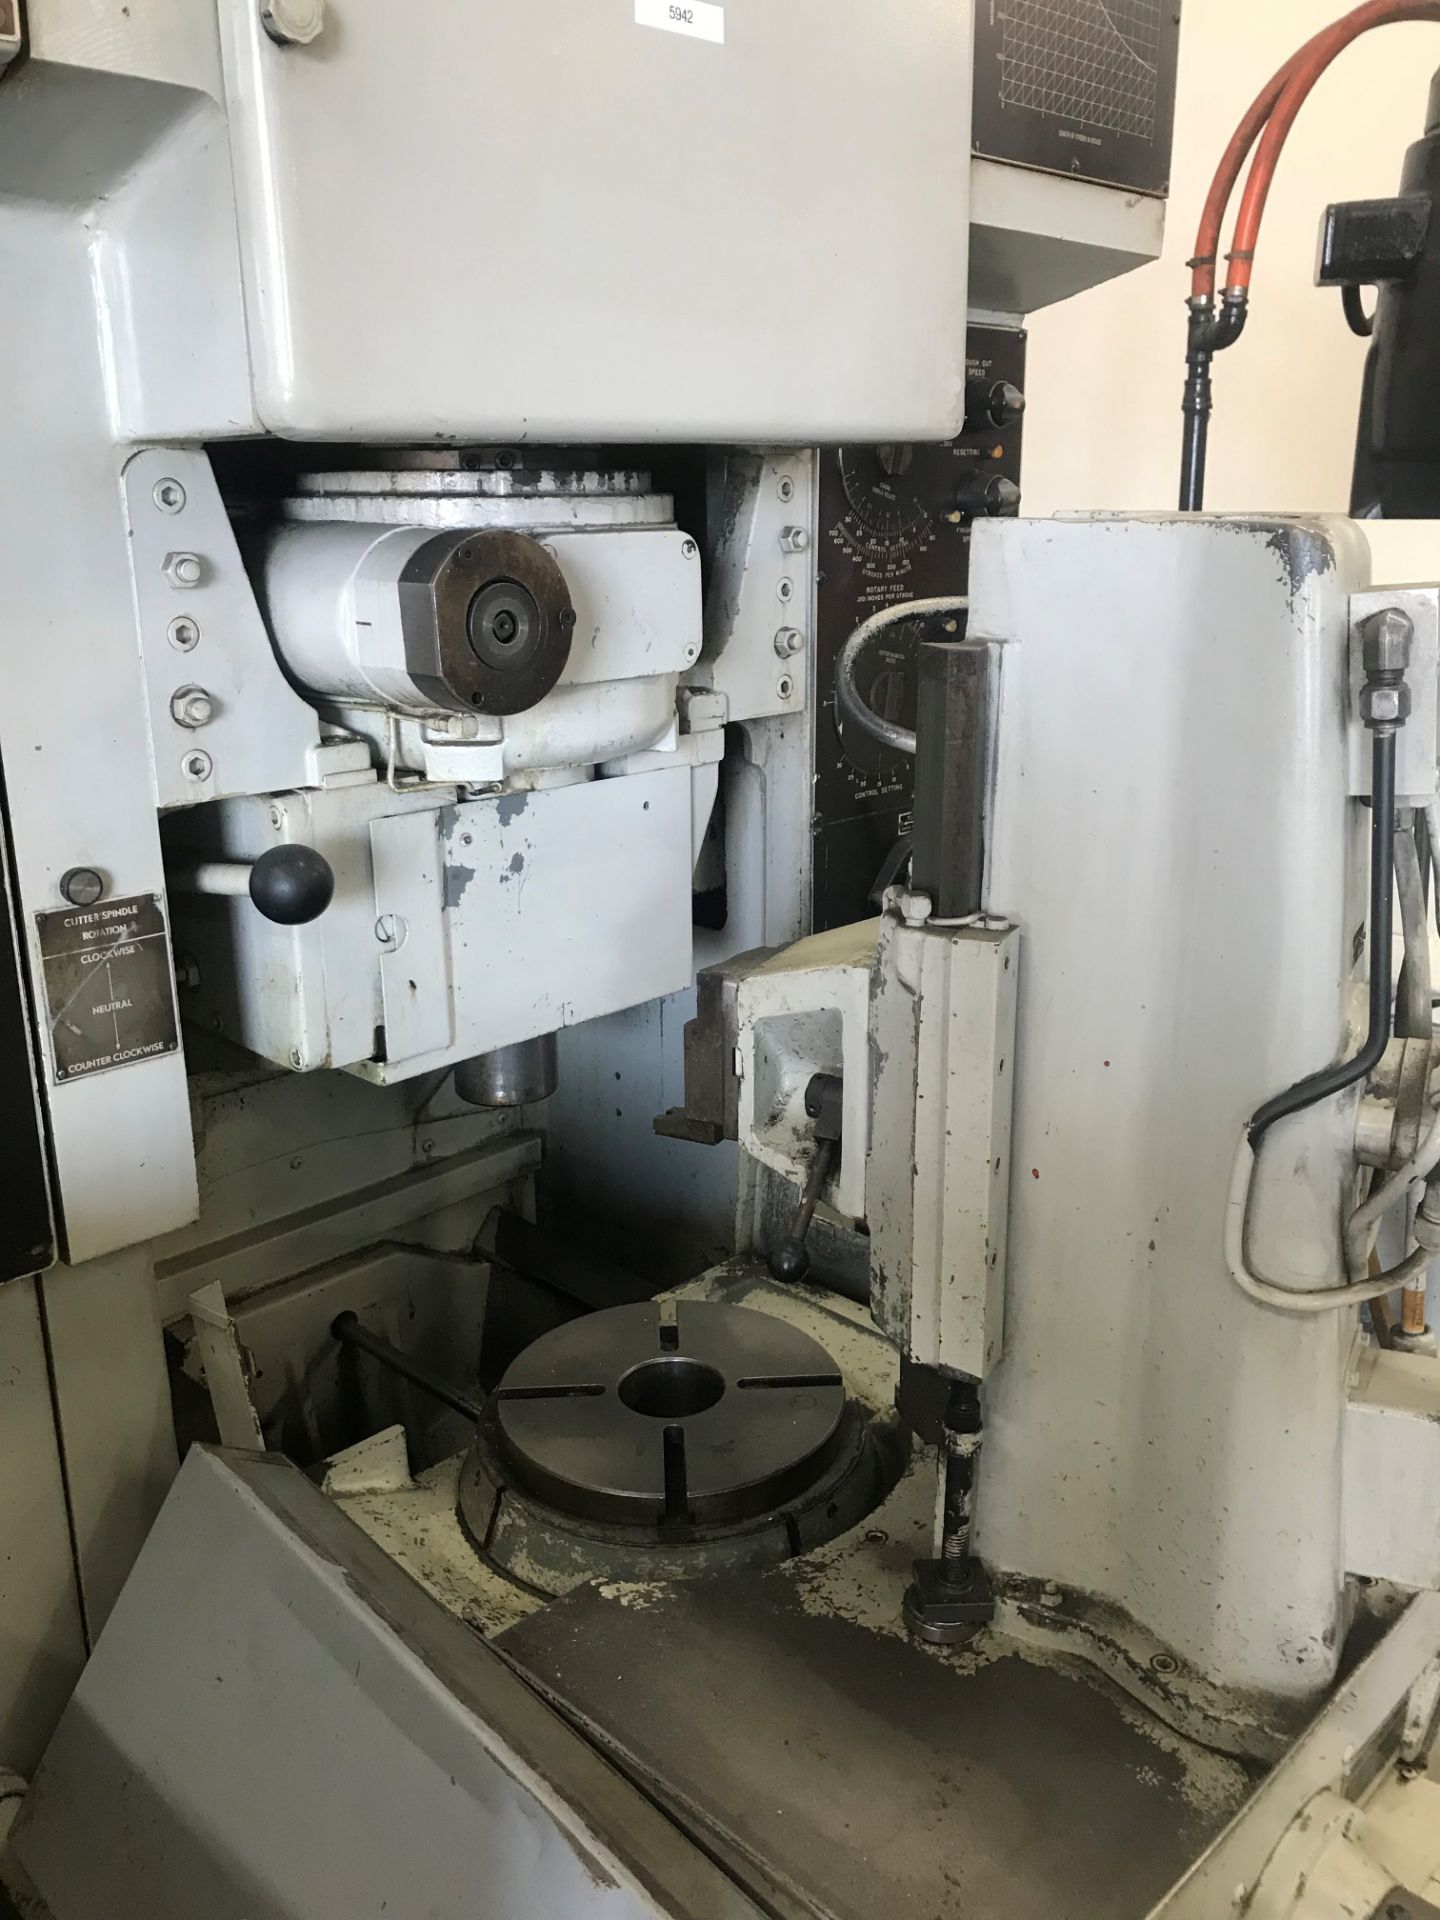 Barber Coleman mdl. 10-VGS 10” Gear Shaper s/n 32 w/ Barber Coleman Controls, SOLD AS IS - Image 4 of 19